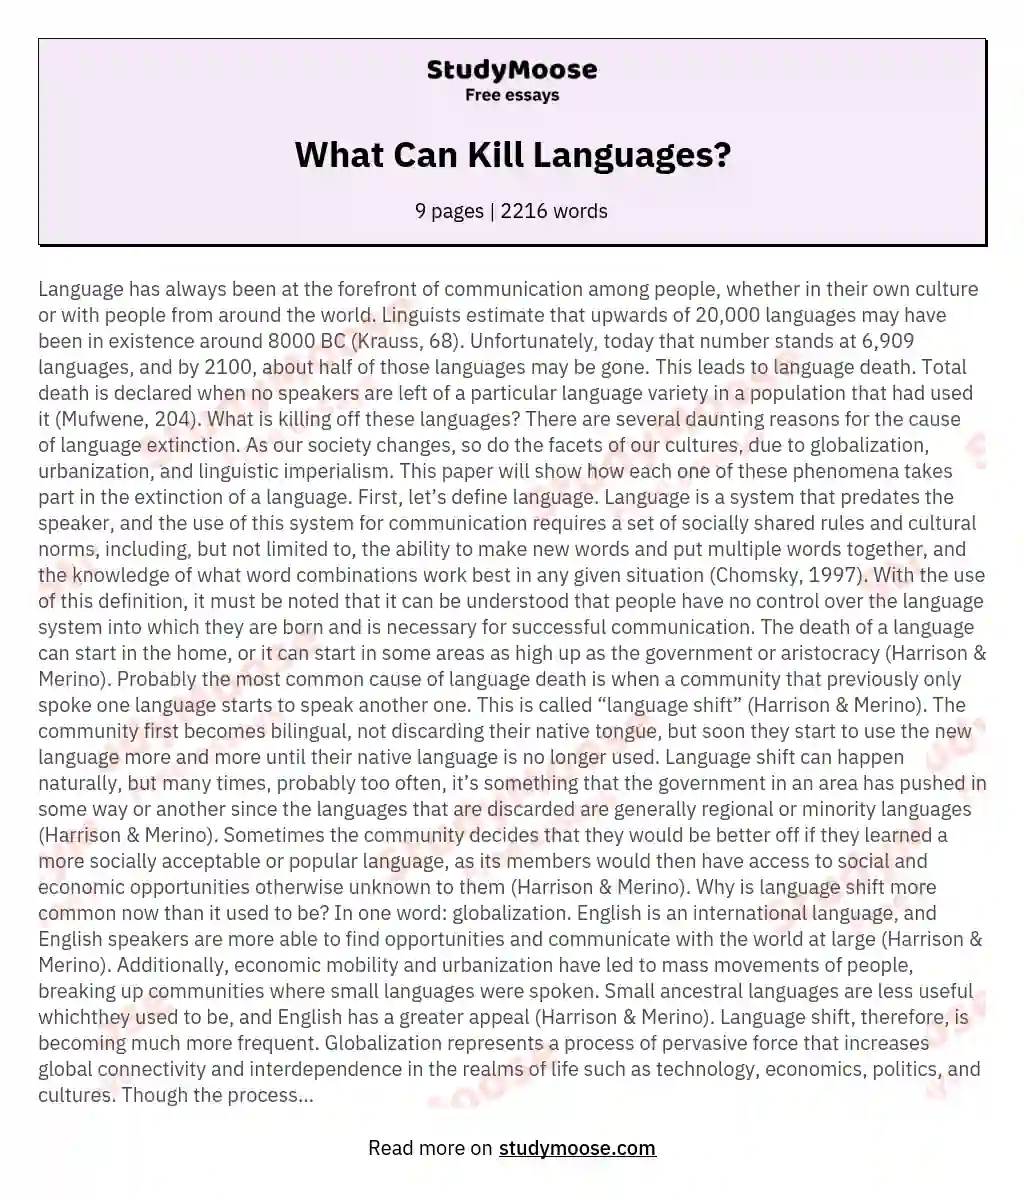 What Can Kill Languages? essay